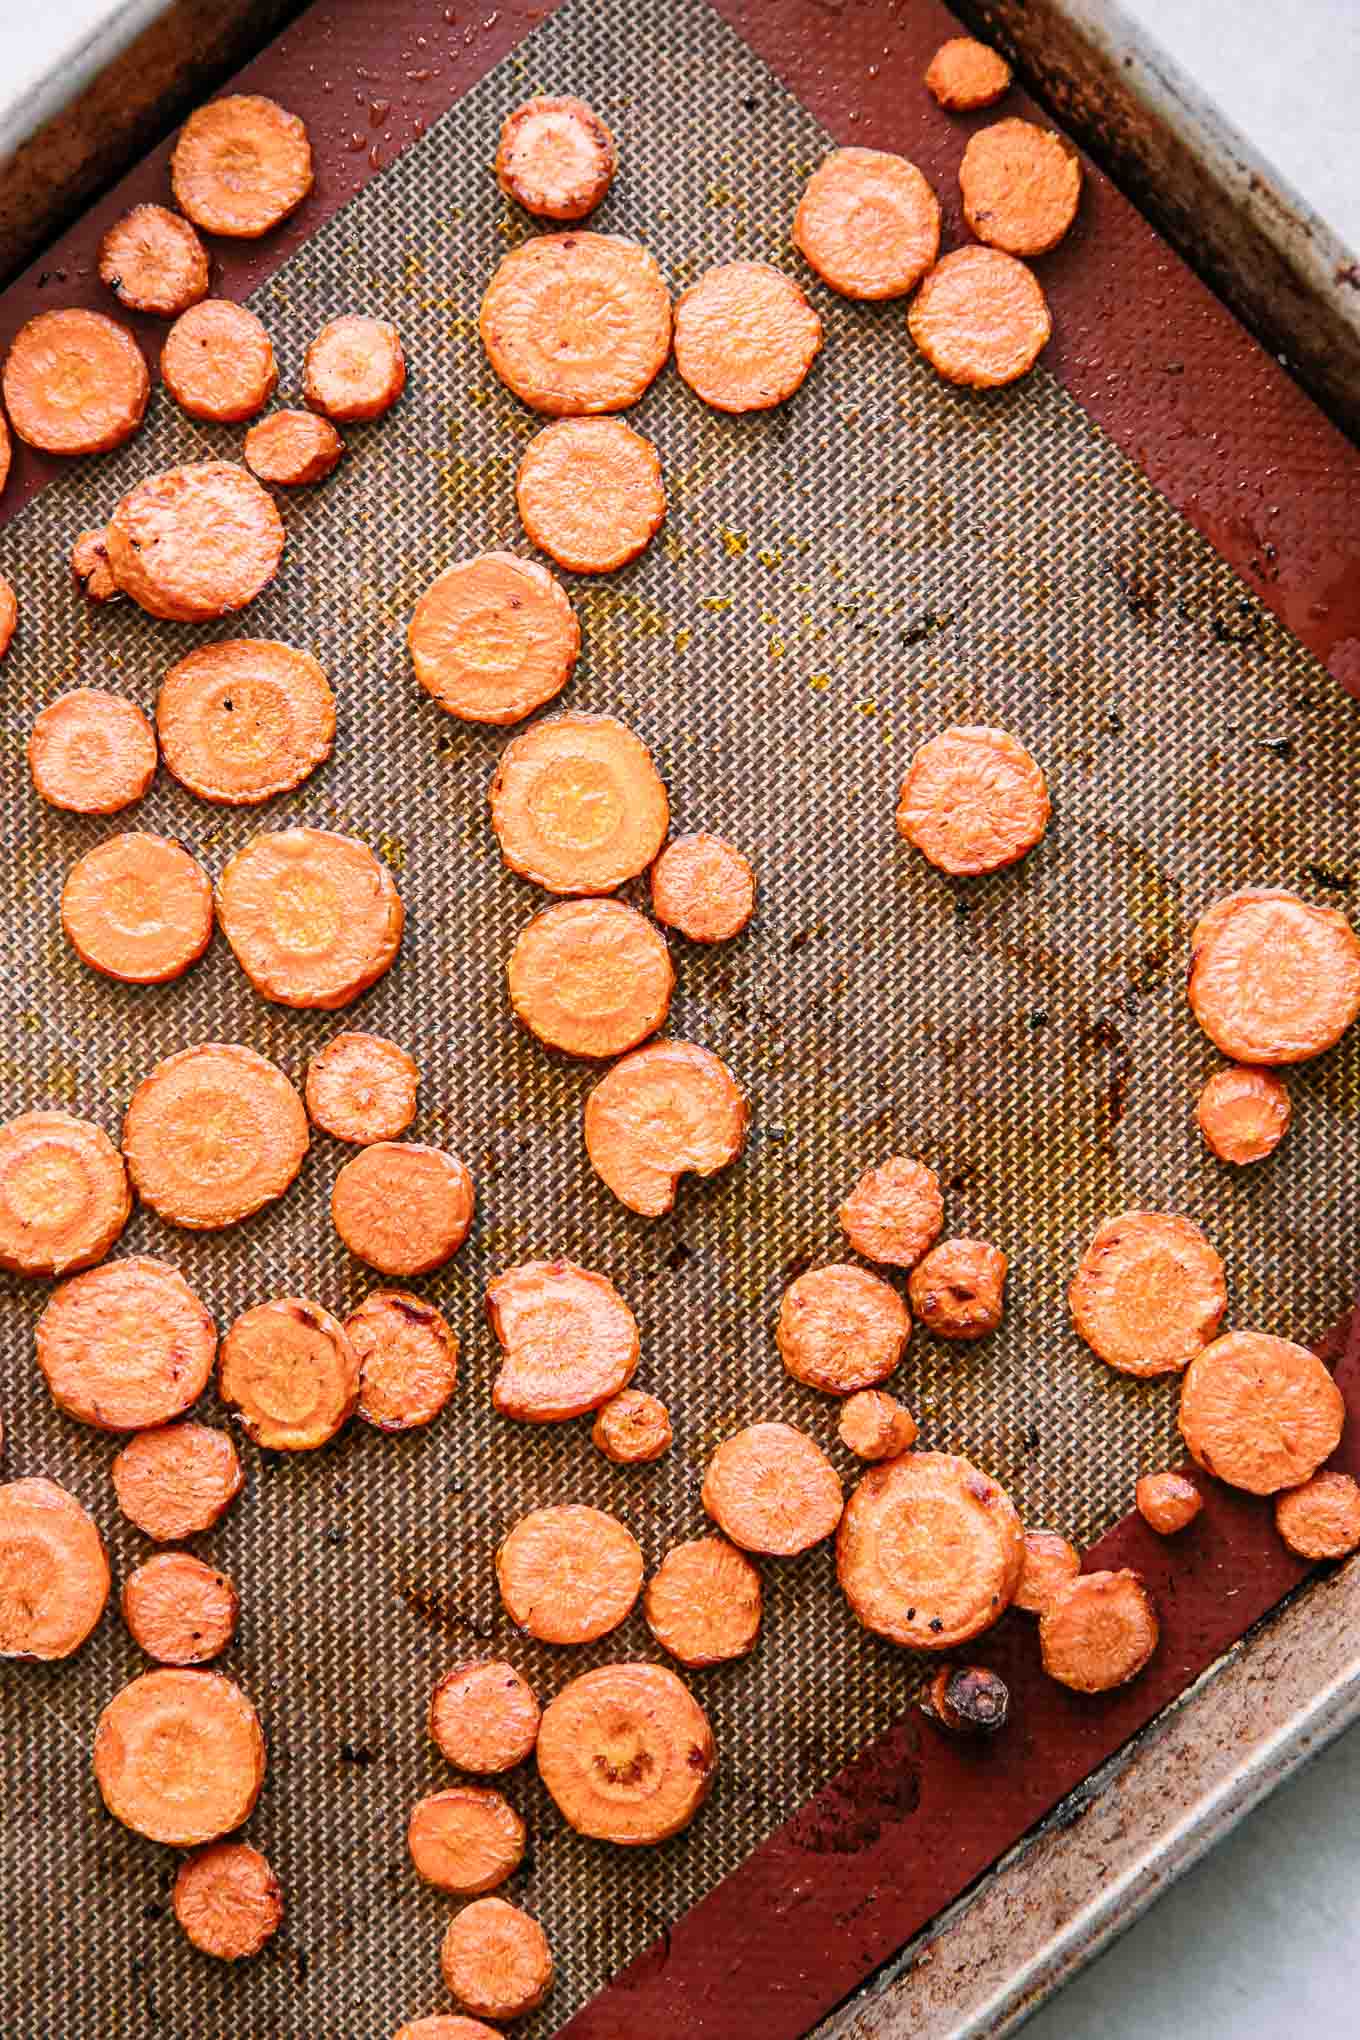 roasted sliced carrots on a baking sheet after baking